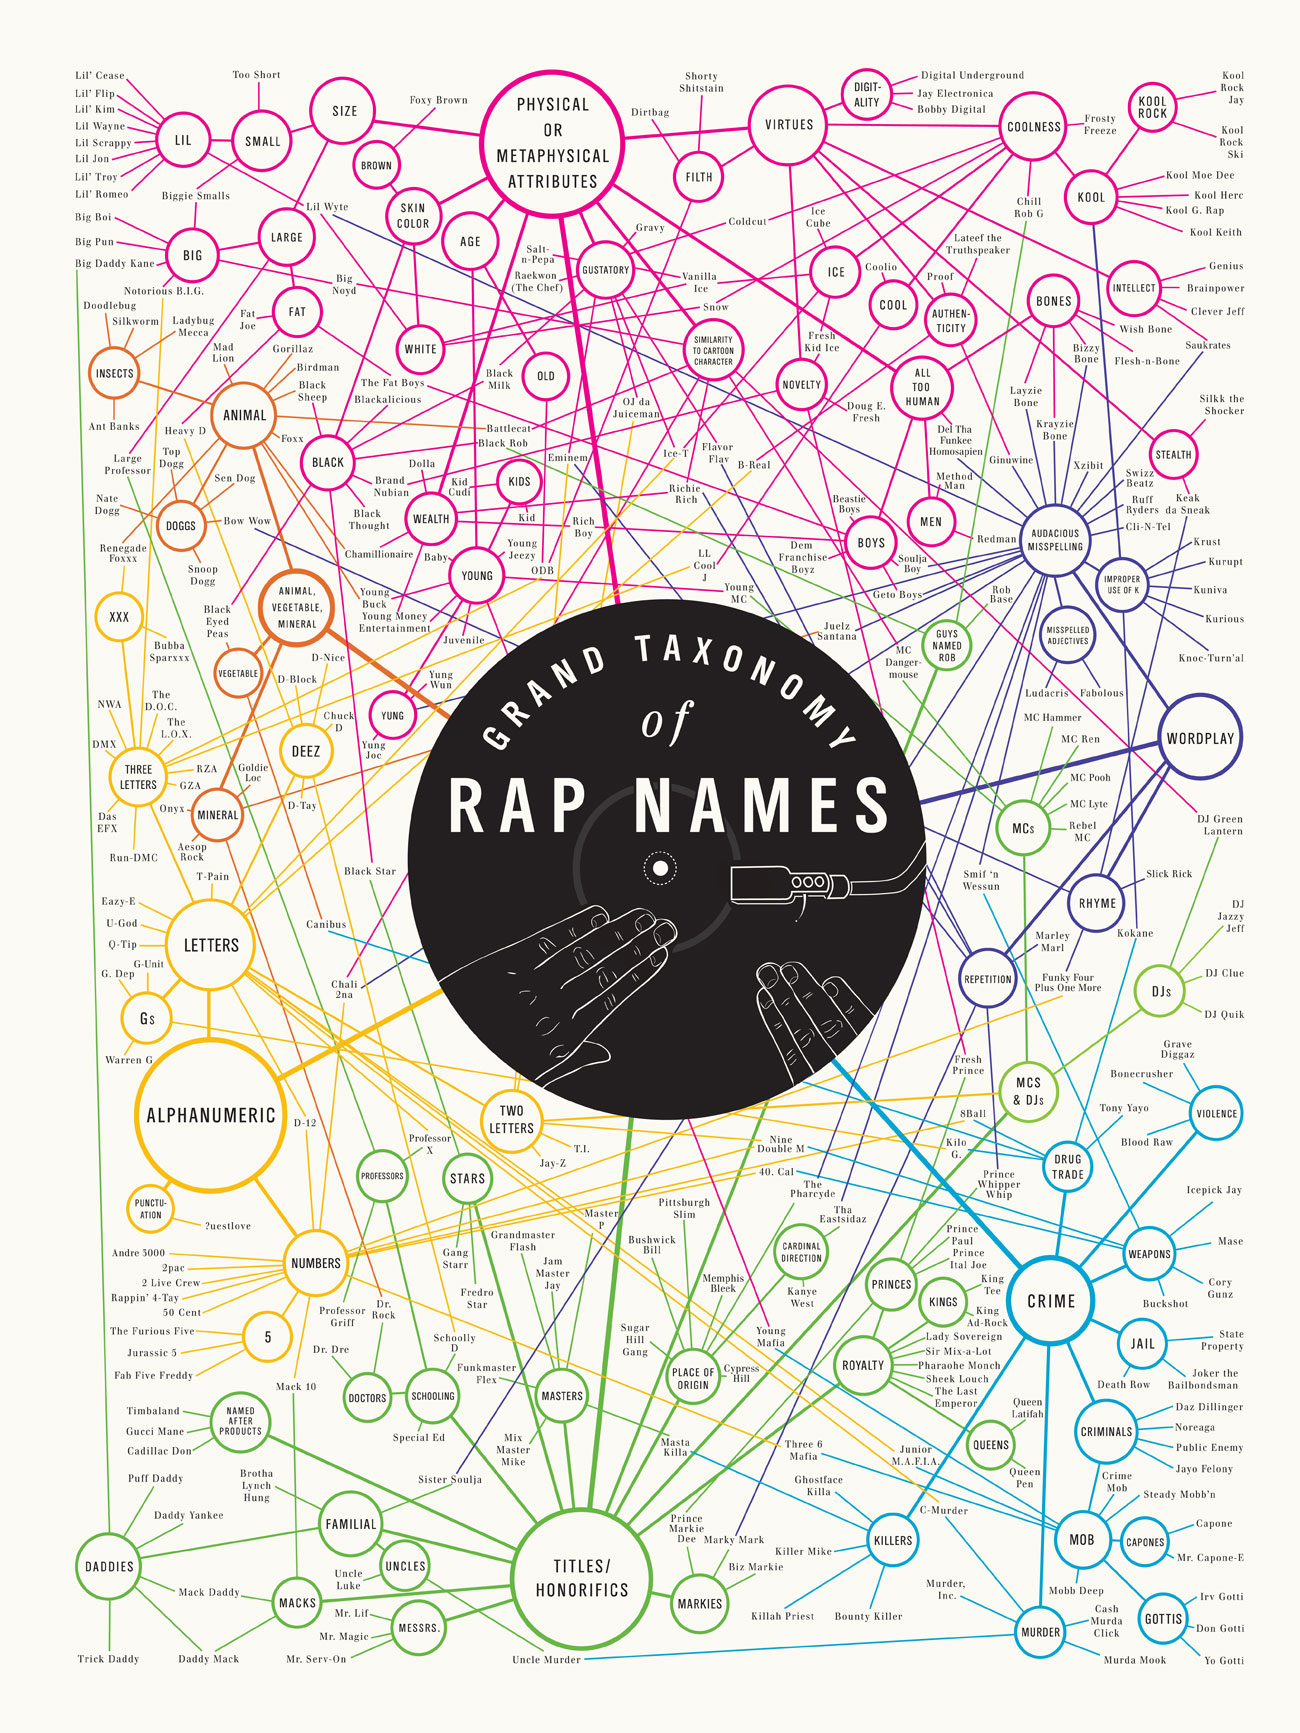 Grand Taxonomy of Rap Names infographic